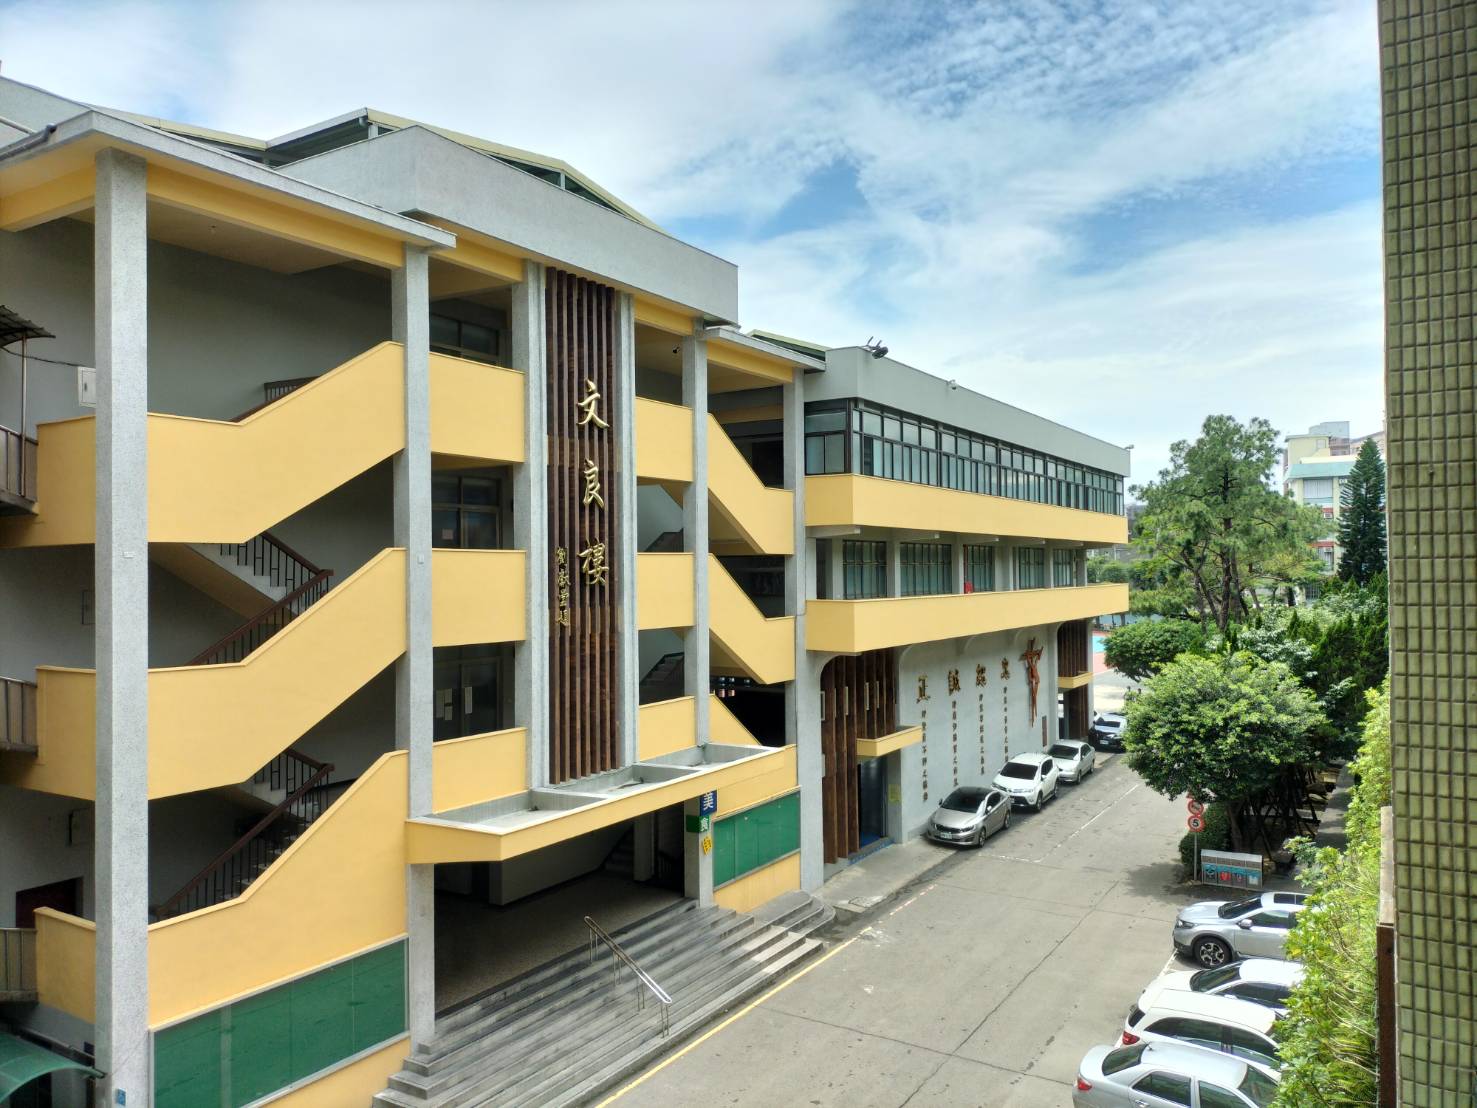 Teaching English and Living in Taiwan Jobs Available 教學工作, St. Francis Xavier Senior High School Private Catholic Senior School Offers PERFECT Full-time Position! Up to NT$80,000+ / Month! Combined Junior and Senior High School on Big Leafy Green Campus in the Heart of the City! image